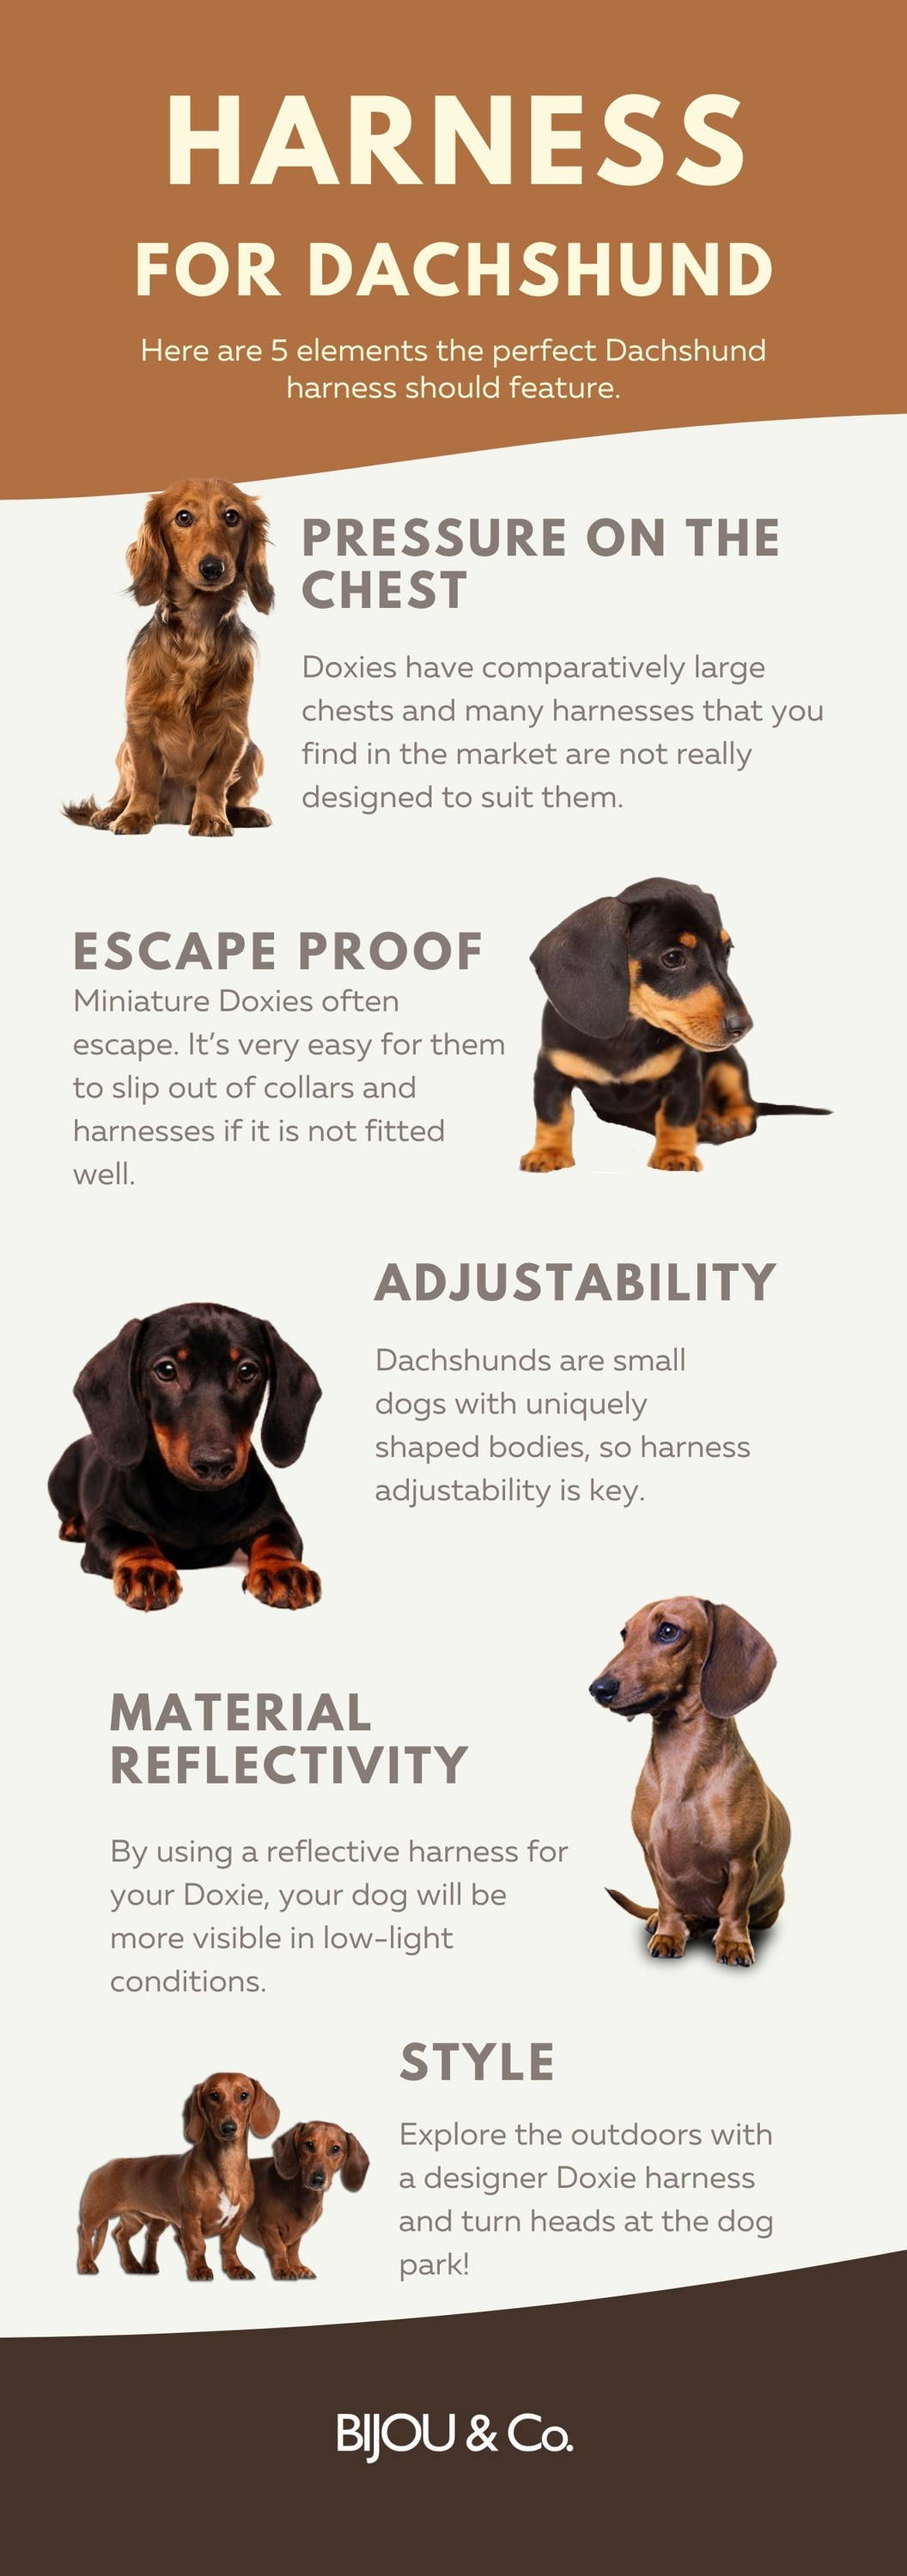 best harness for dachshund dogs